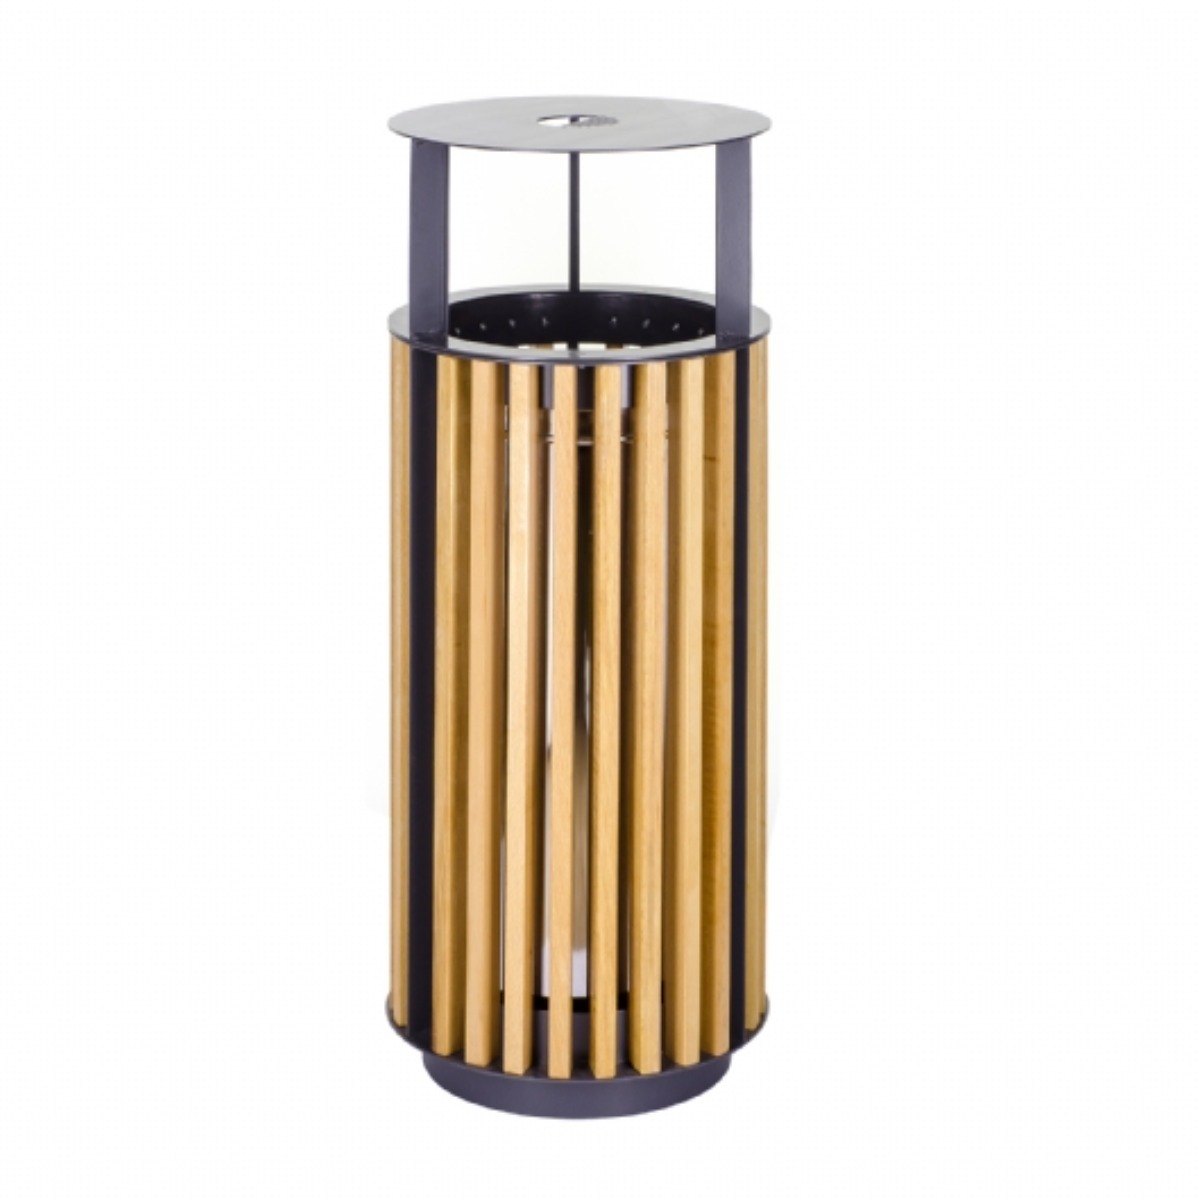 AB-509 Wood Open Space Trash Can